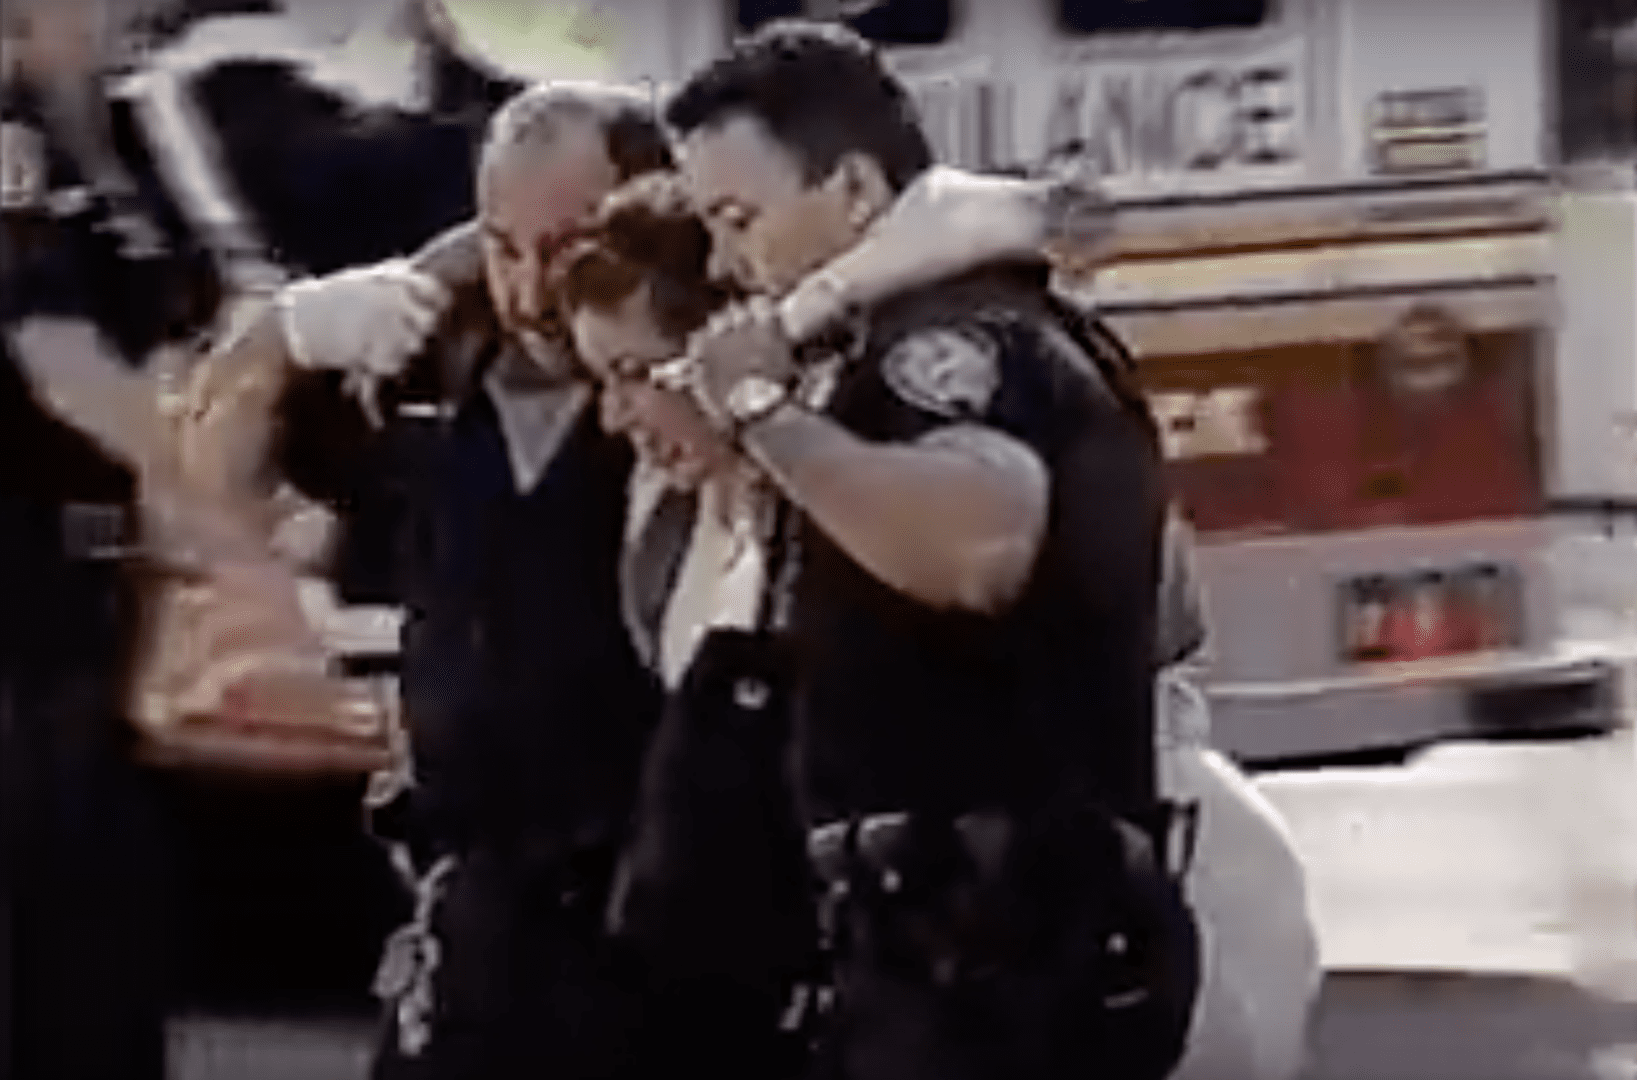 A couple of police officers are hugging each other